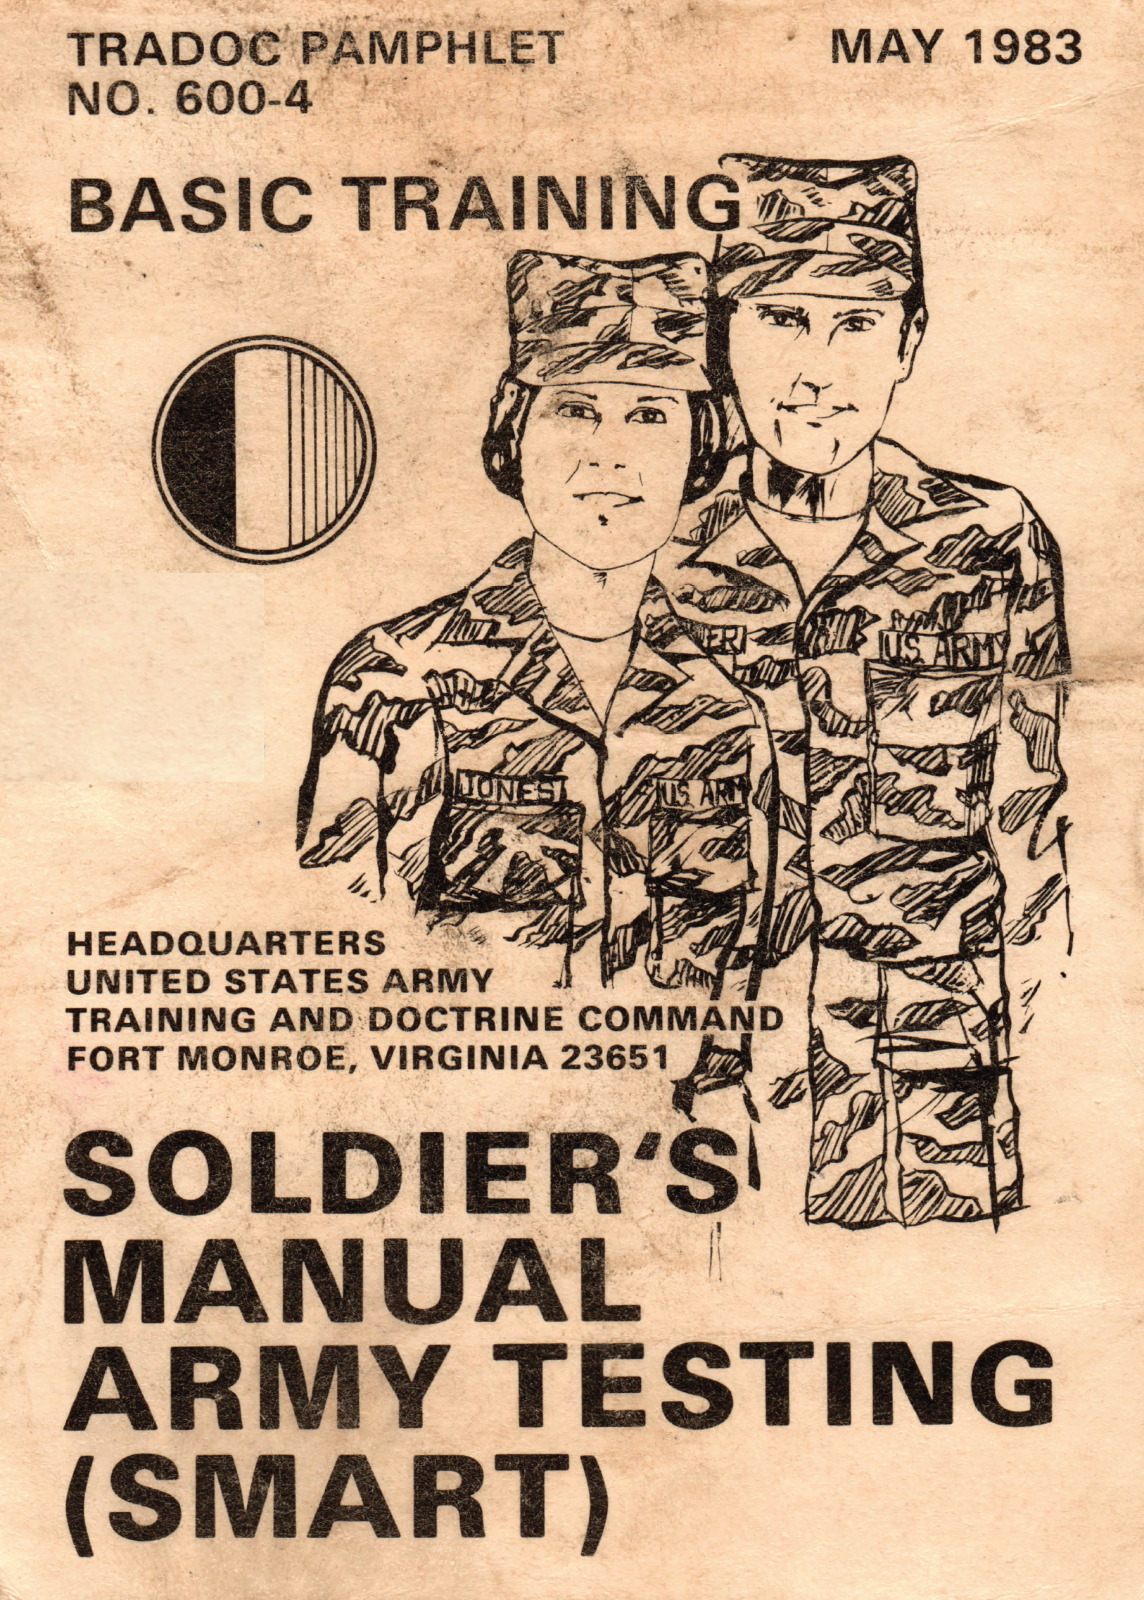 156 Page May 1983 BASIC TRAINING SOLDIER'S MANUAL ARMY TESTING SMART on Data CD